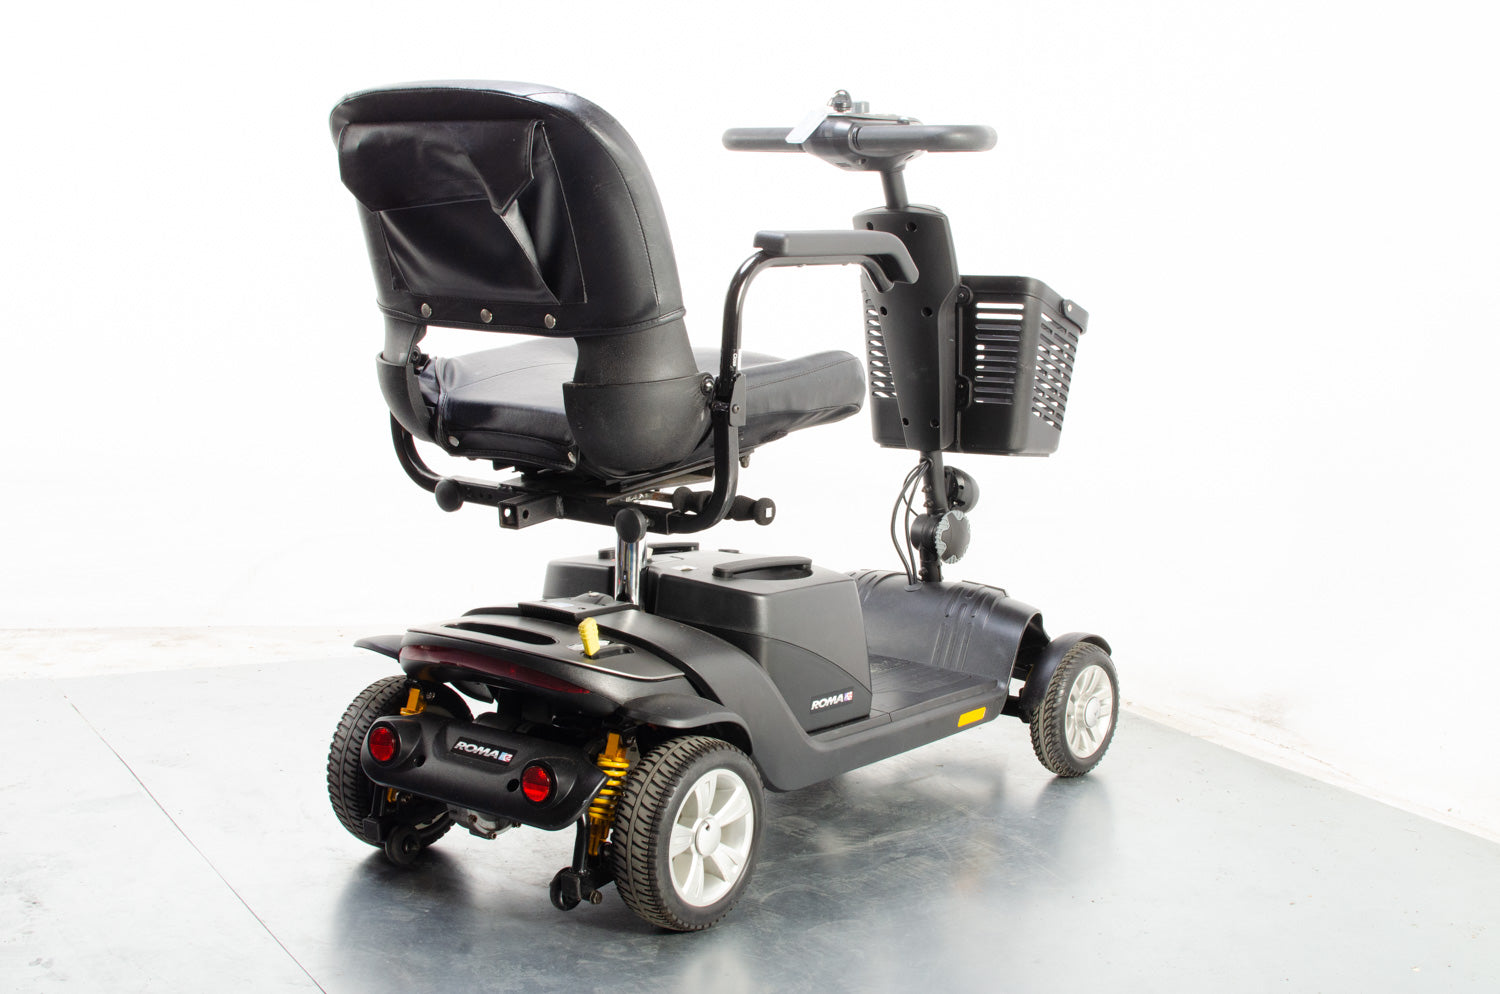 2018 Roma Denver Plus 4mph Transportable Mobility Boot Scooter in Grey